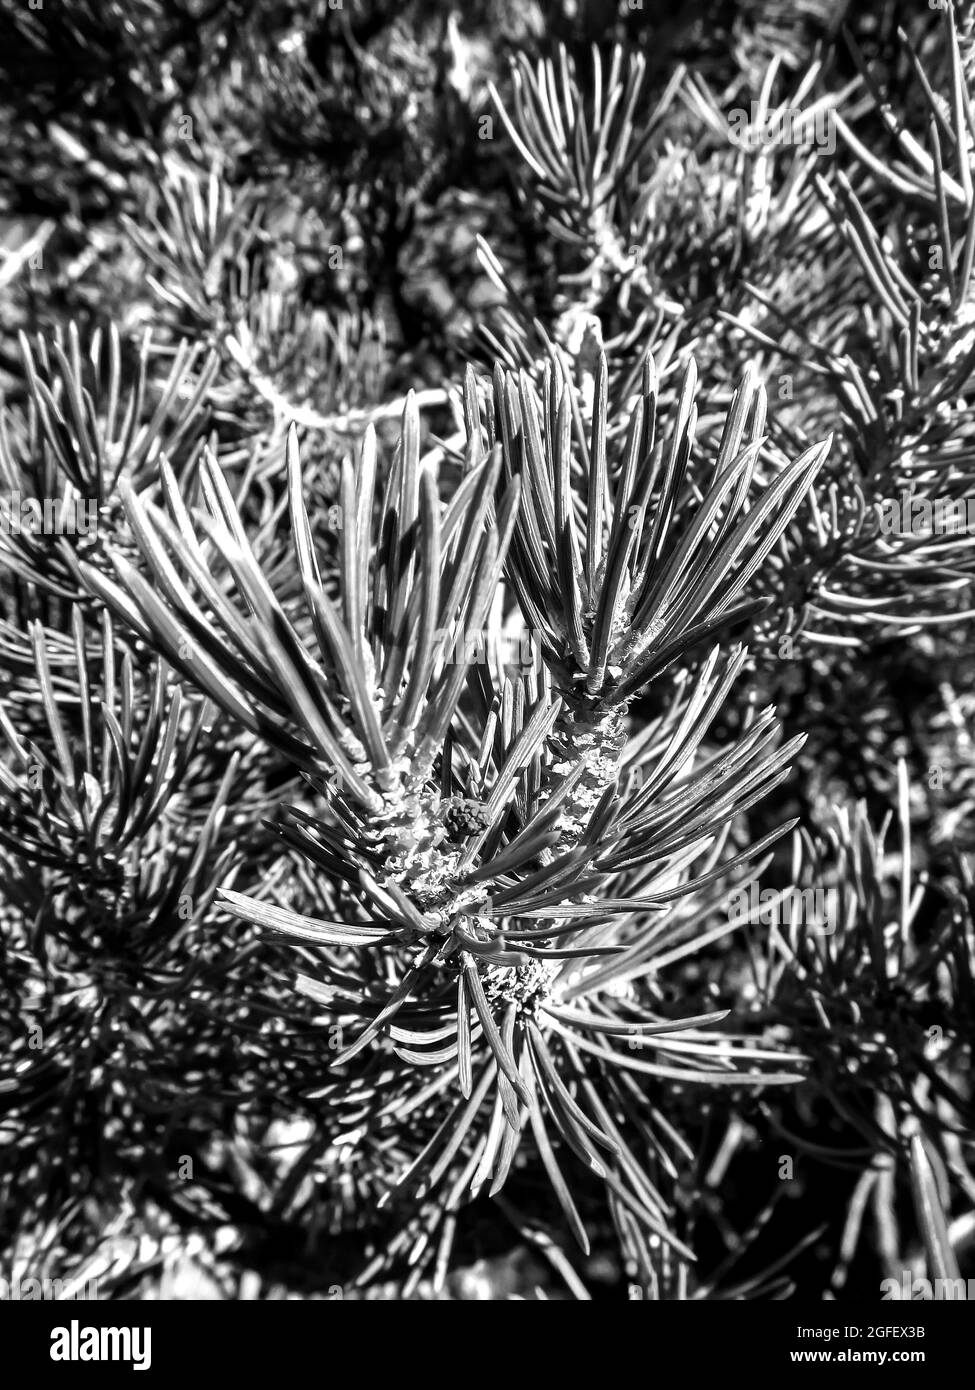 Close-up of the needles of a Utah Juniper, Juniperus Osteosperma, in black and white in the Petrified Forest state park, outside Escalante, Utah, USA Stock Photo